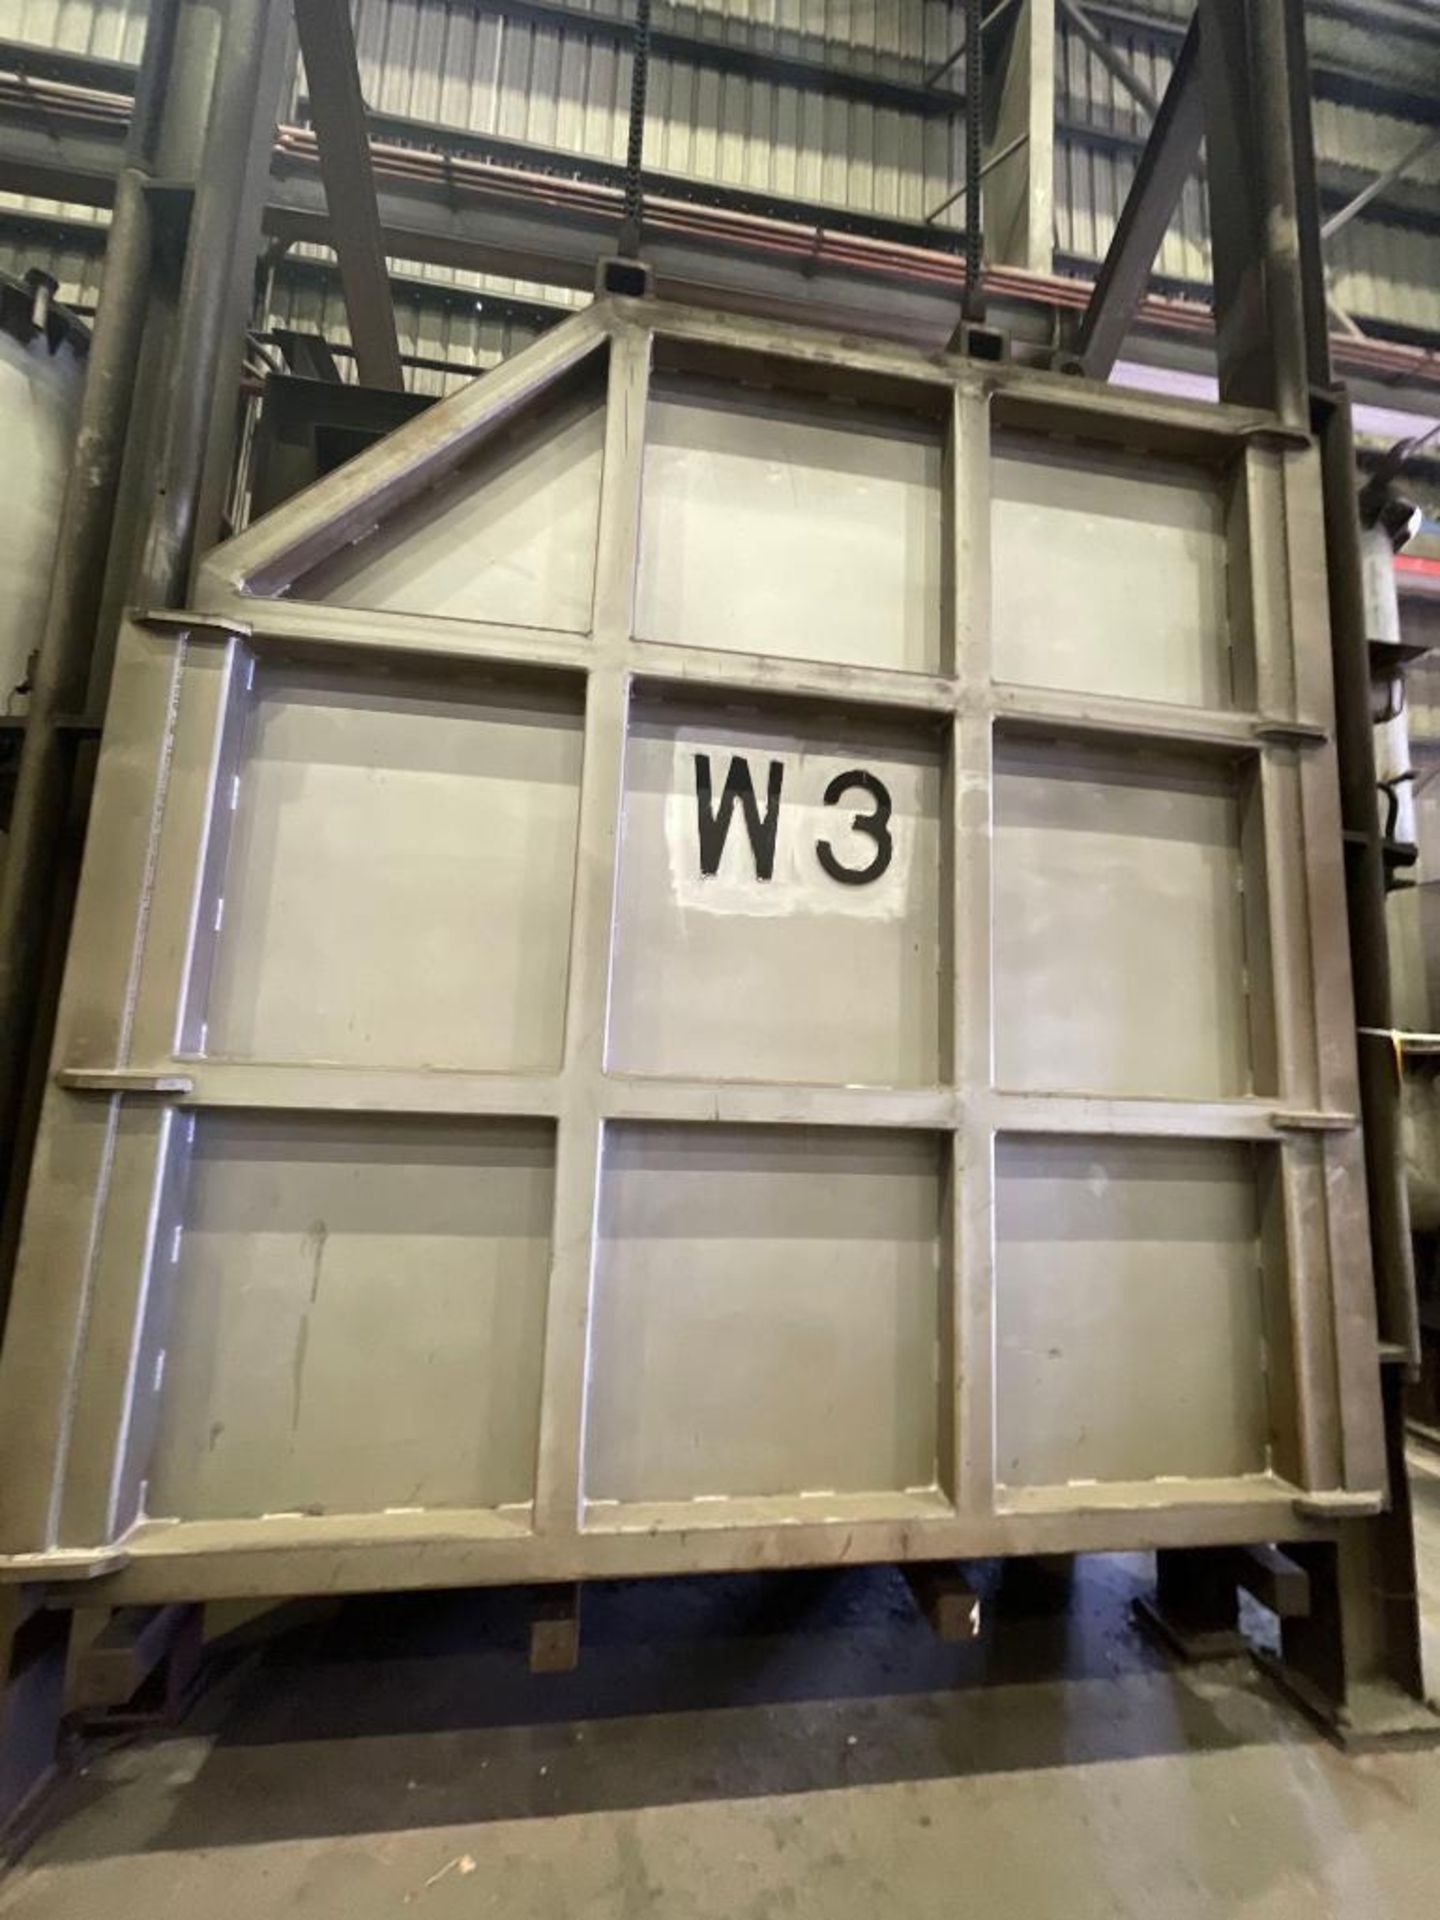 Box Type Furnace: W3: Dril-Quip built 1850 Degree F - Image 2 of 4